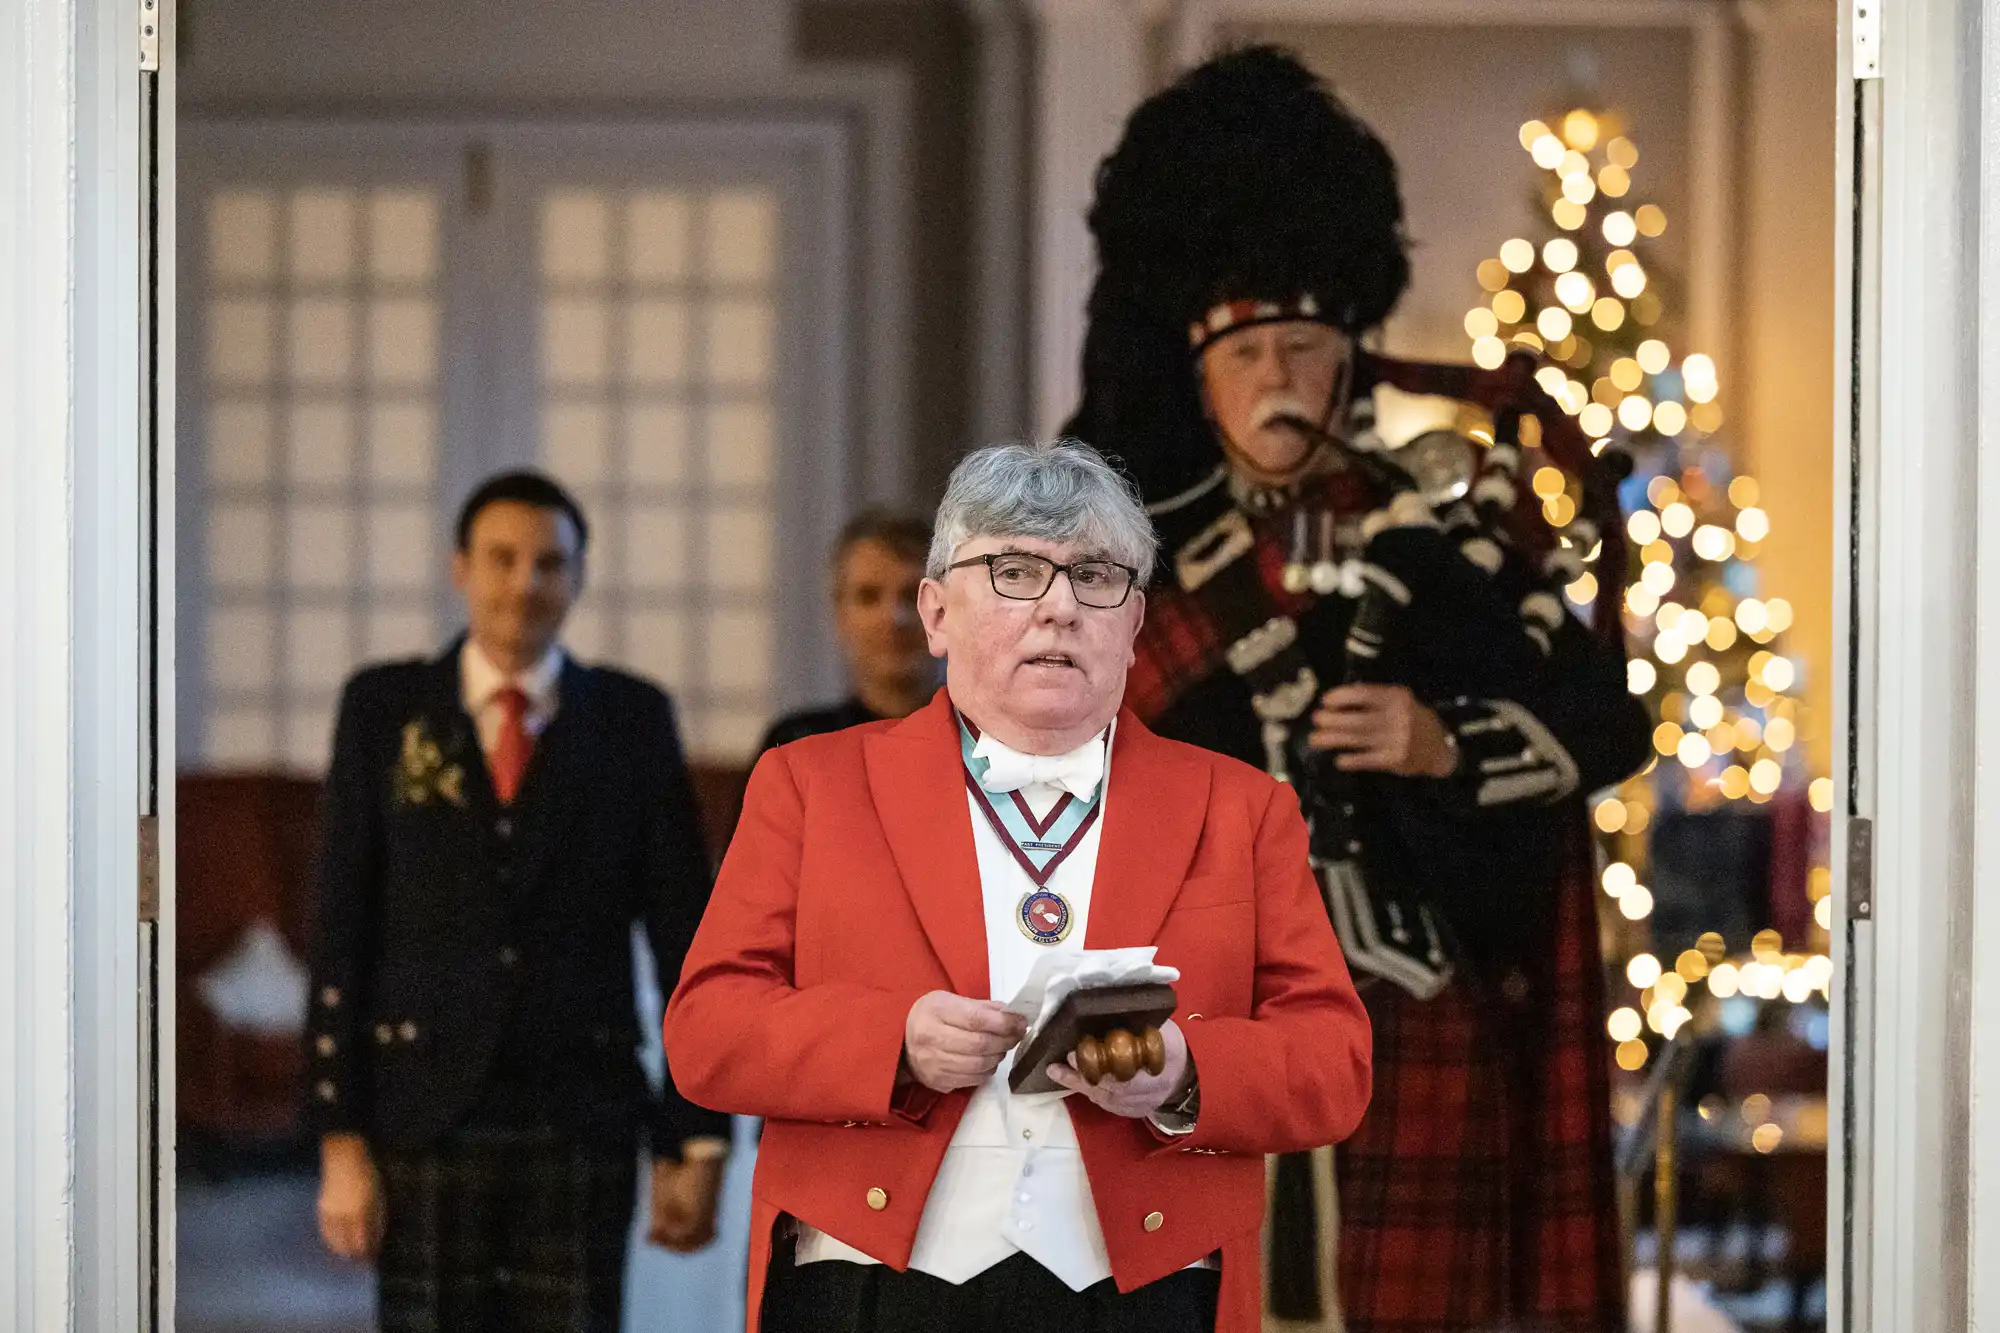 A man in a red jacket speaks while holding a notepad, flanked by people in formal attire. A man in traditional Scottish attire and a bagpipe stands behind him. A decorated Christmas tree is visible.